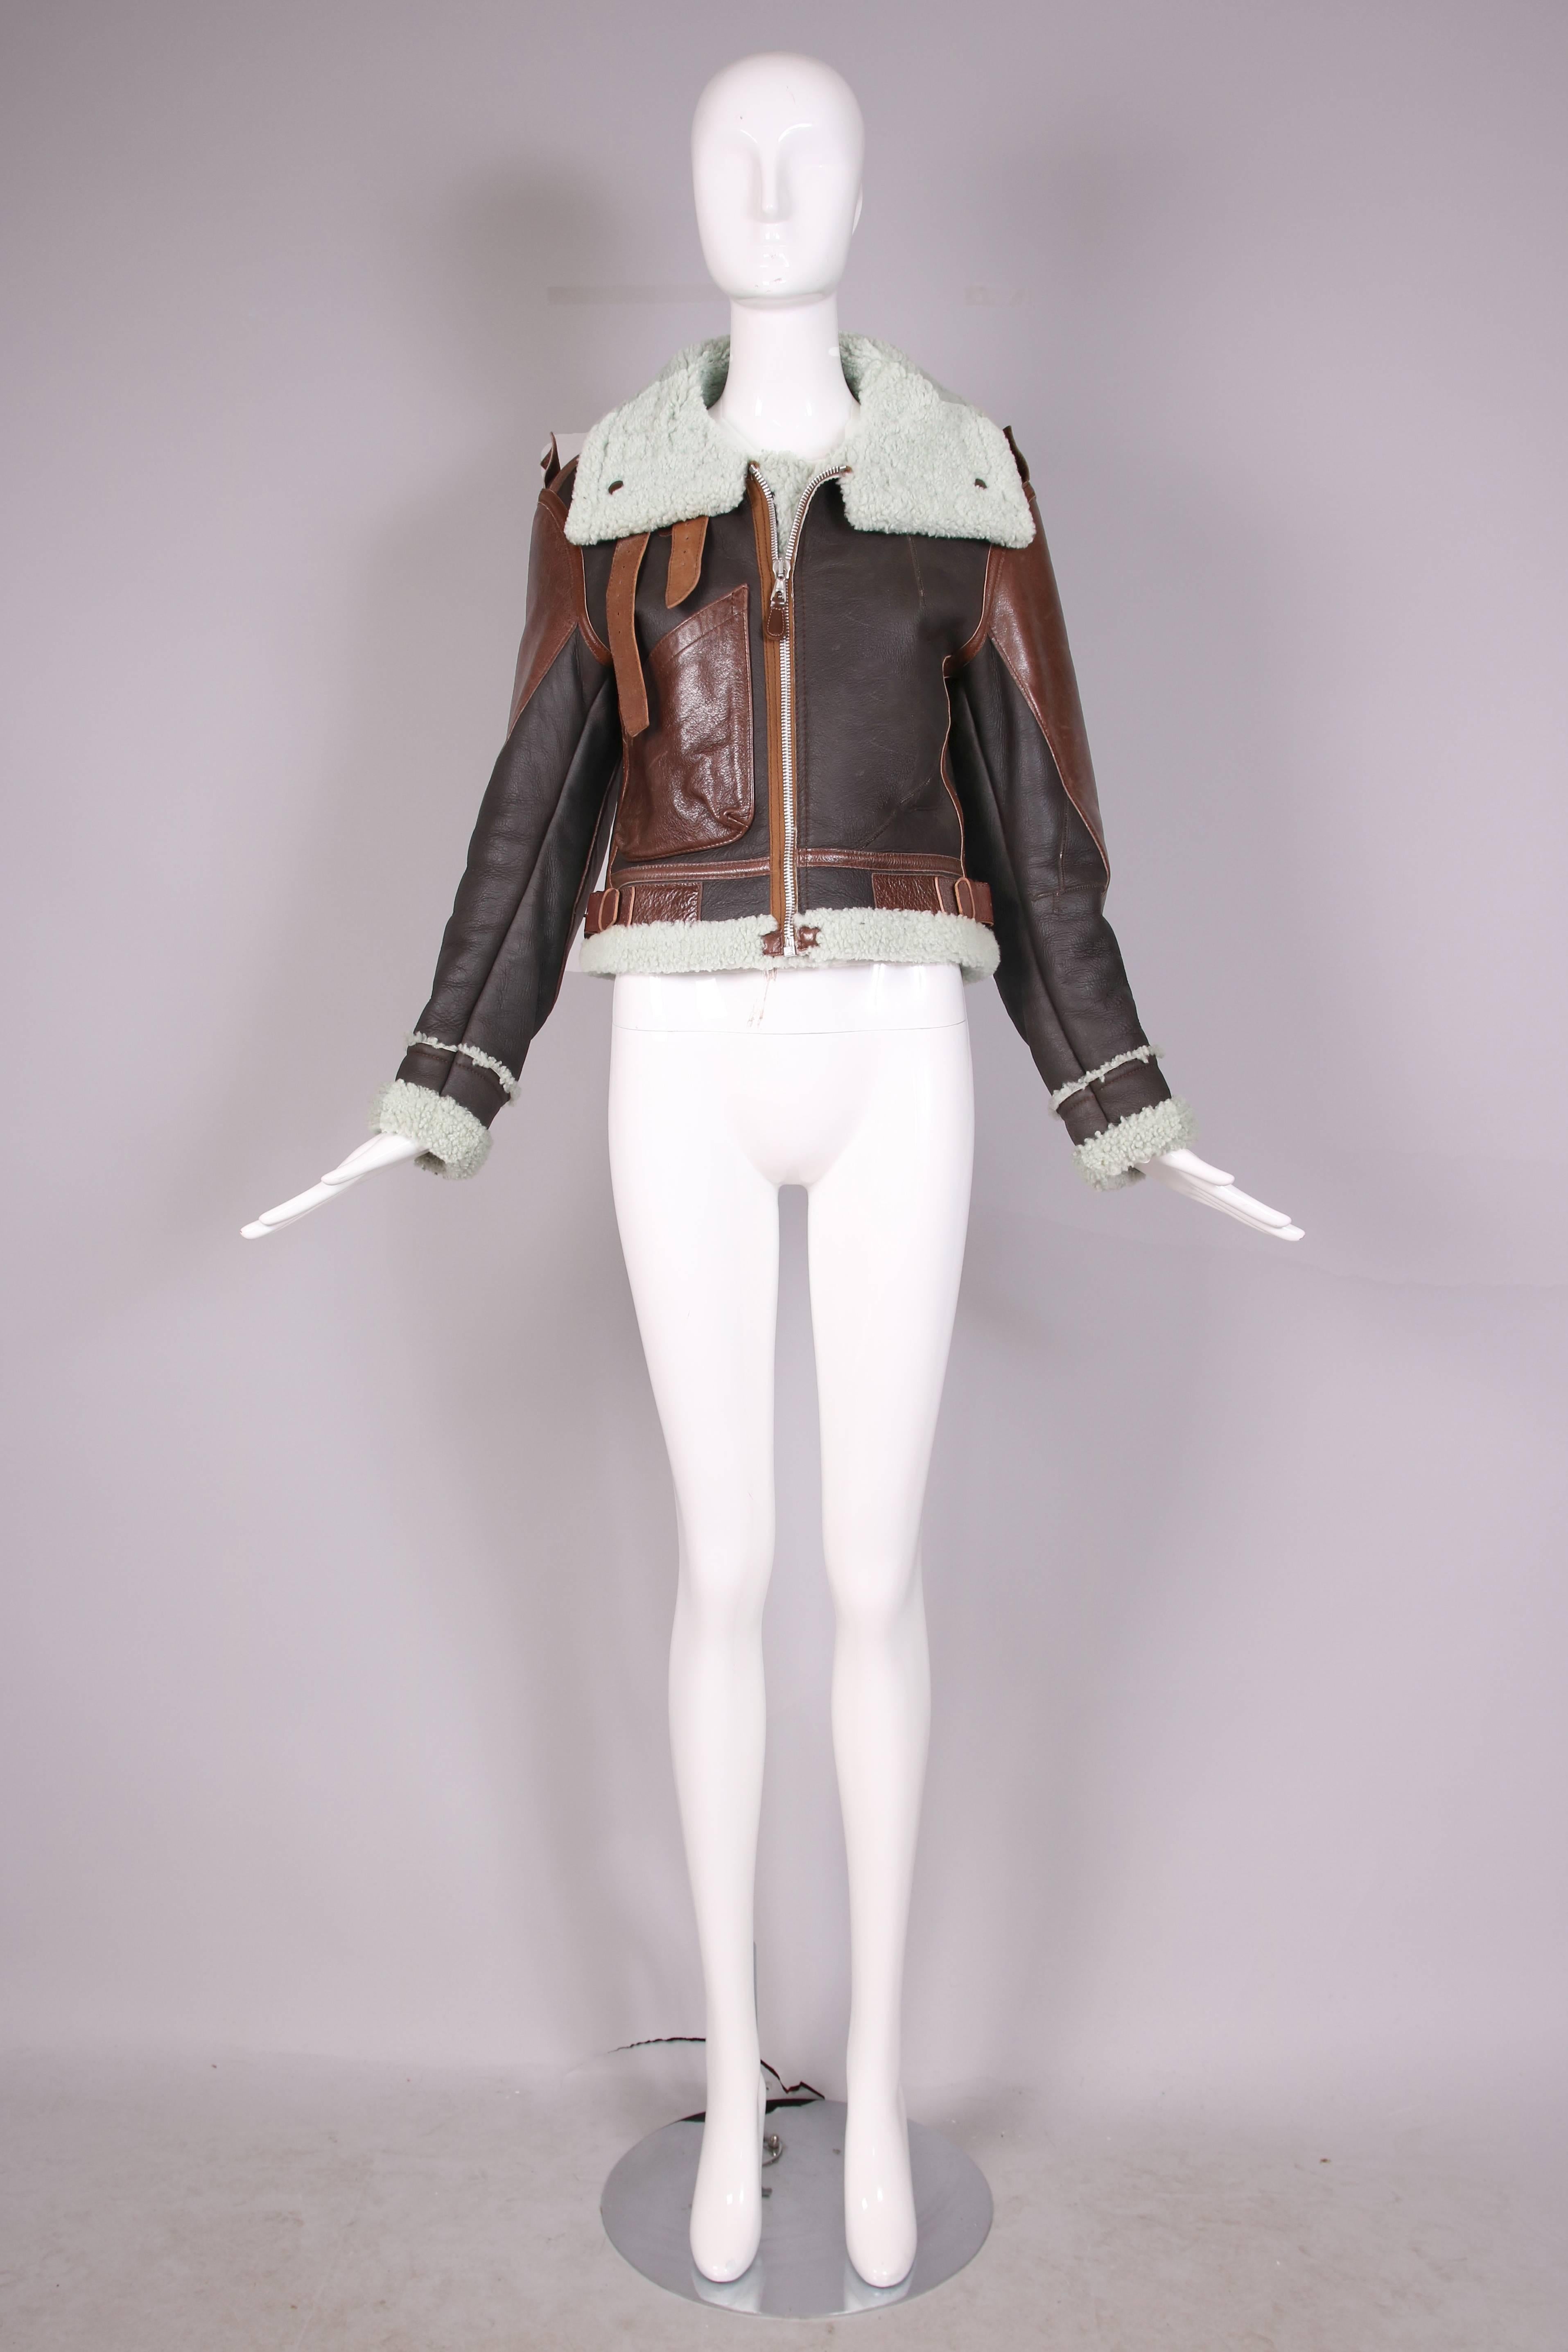 Balenciaga by Ghesquire cropped leather "Palma Aviator Jacket." This jacket is completely lined and trimmed in pale green shearling. In excellent condition. Size EU 40.
MEASUREMENTS:
Bust - 36"
Waist - 34"
Shoulder -